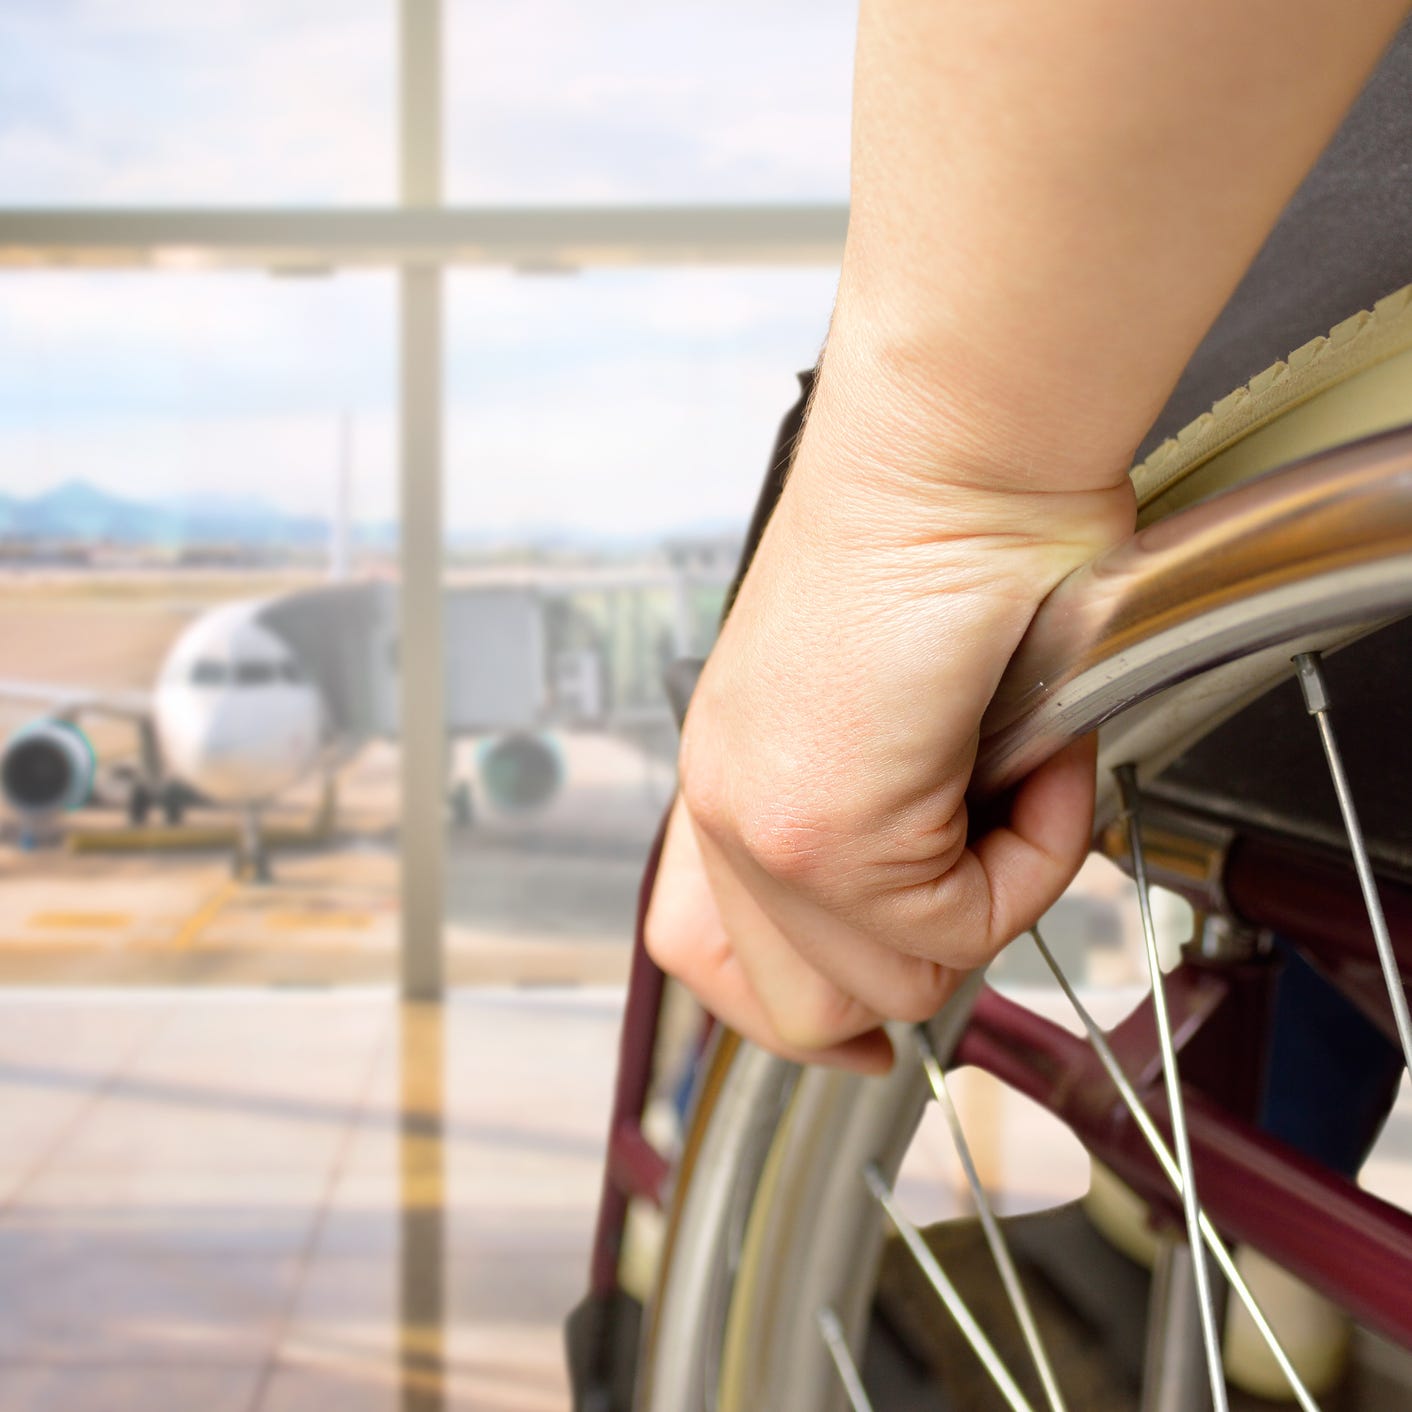 More than 25 million Americans have a disability that limits their travel, according to the Department of Transportation. That's just over 8% percent of the population.